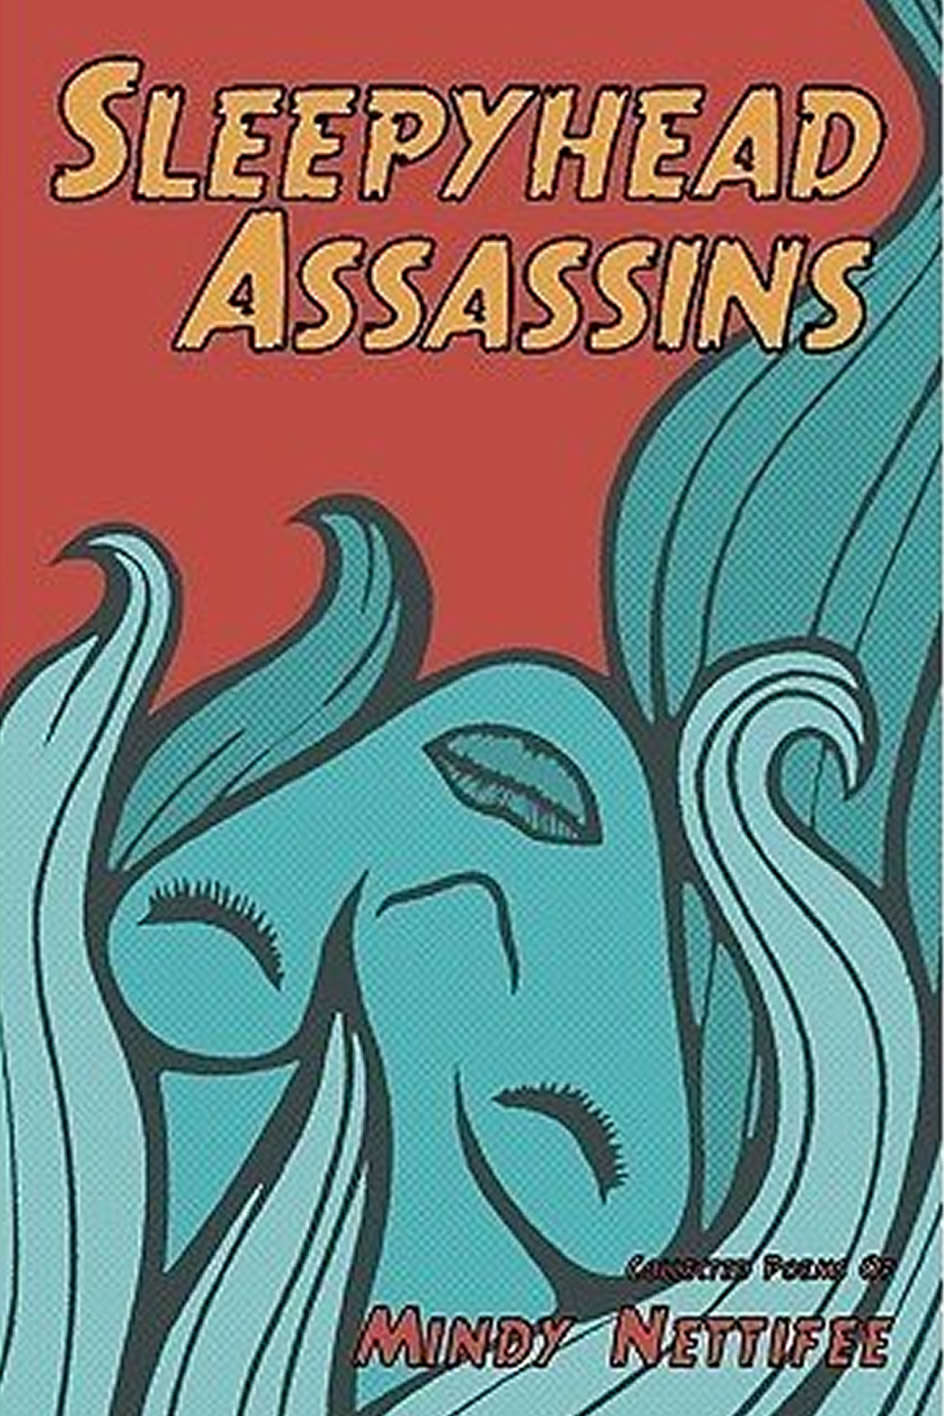 cover art for poetry collection Sleepyhead Assassins